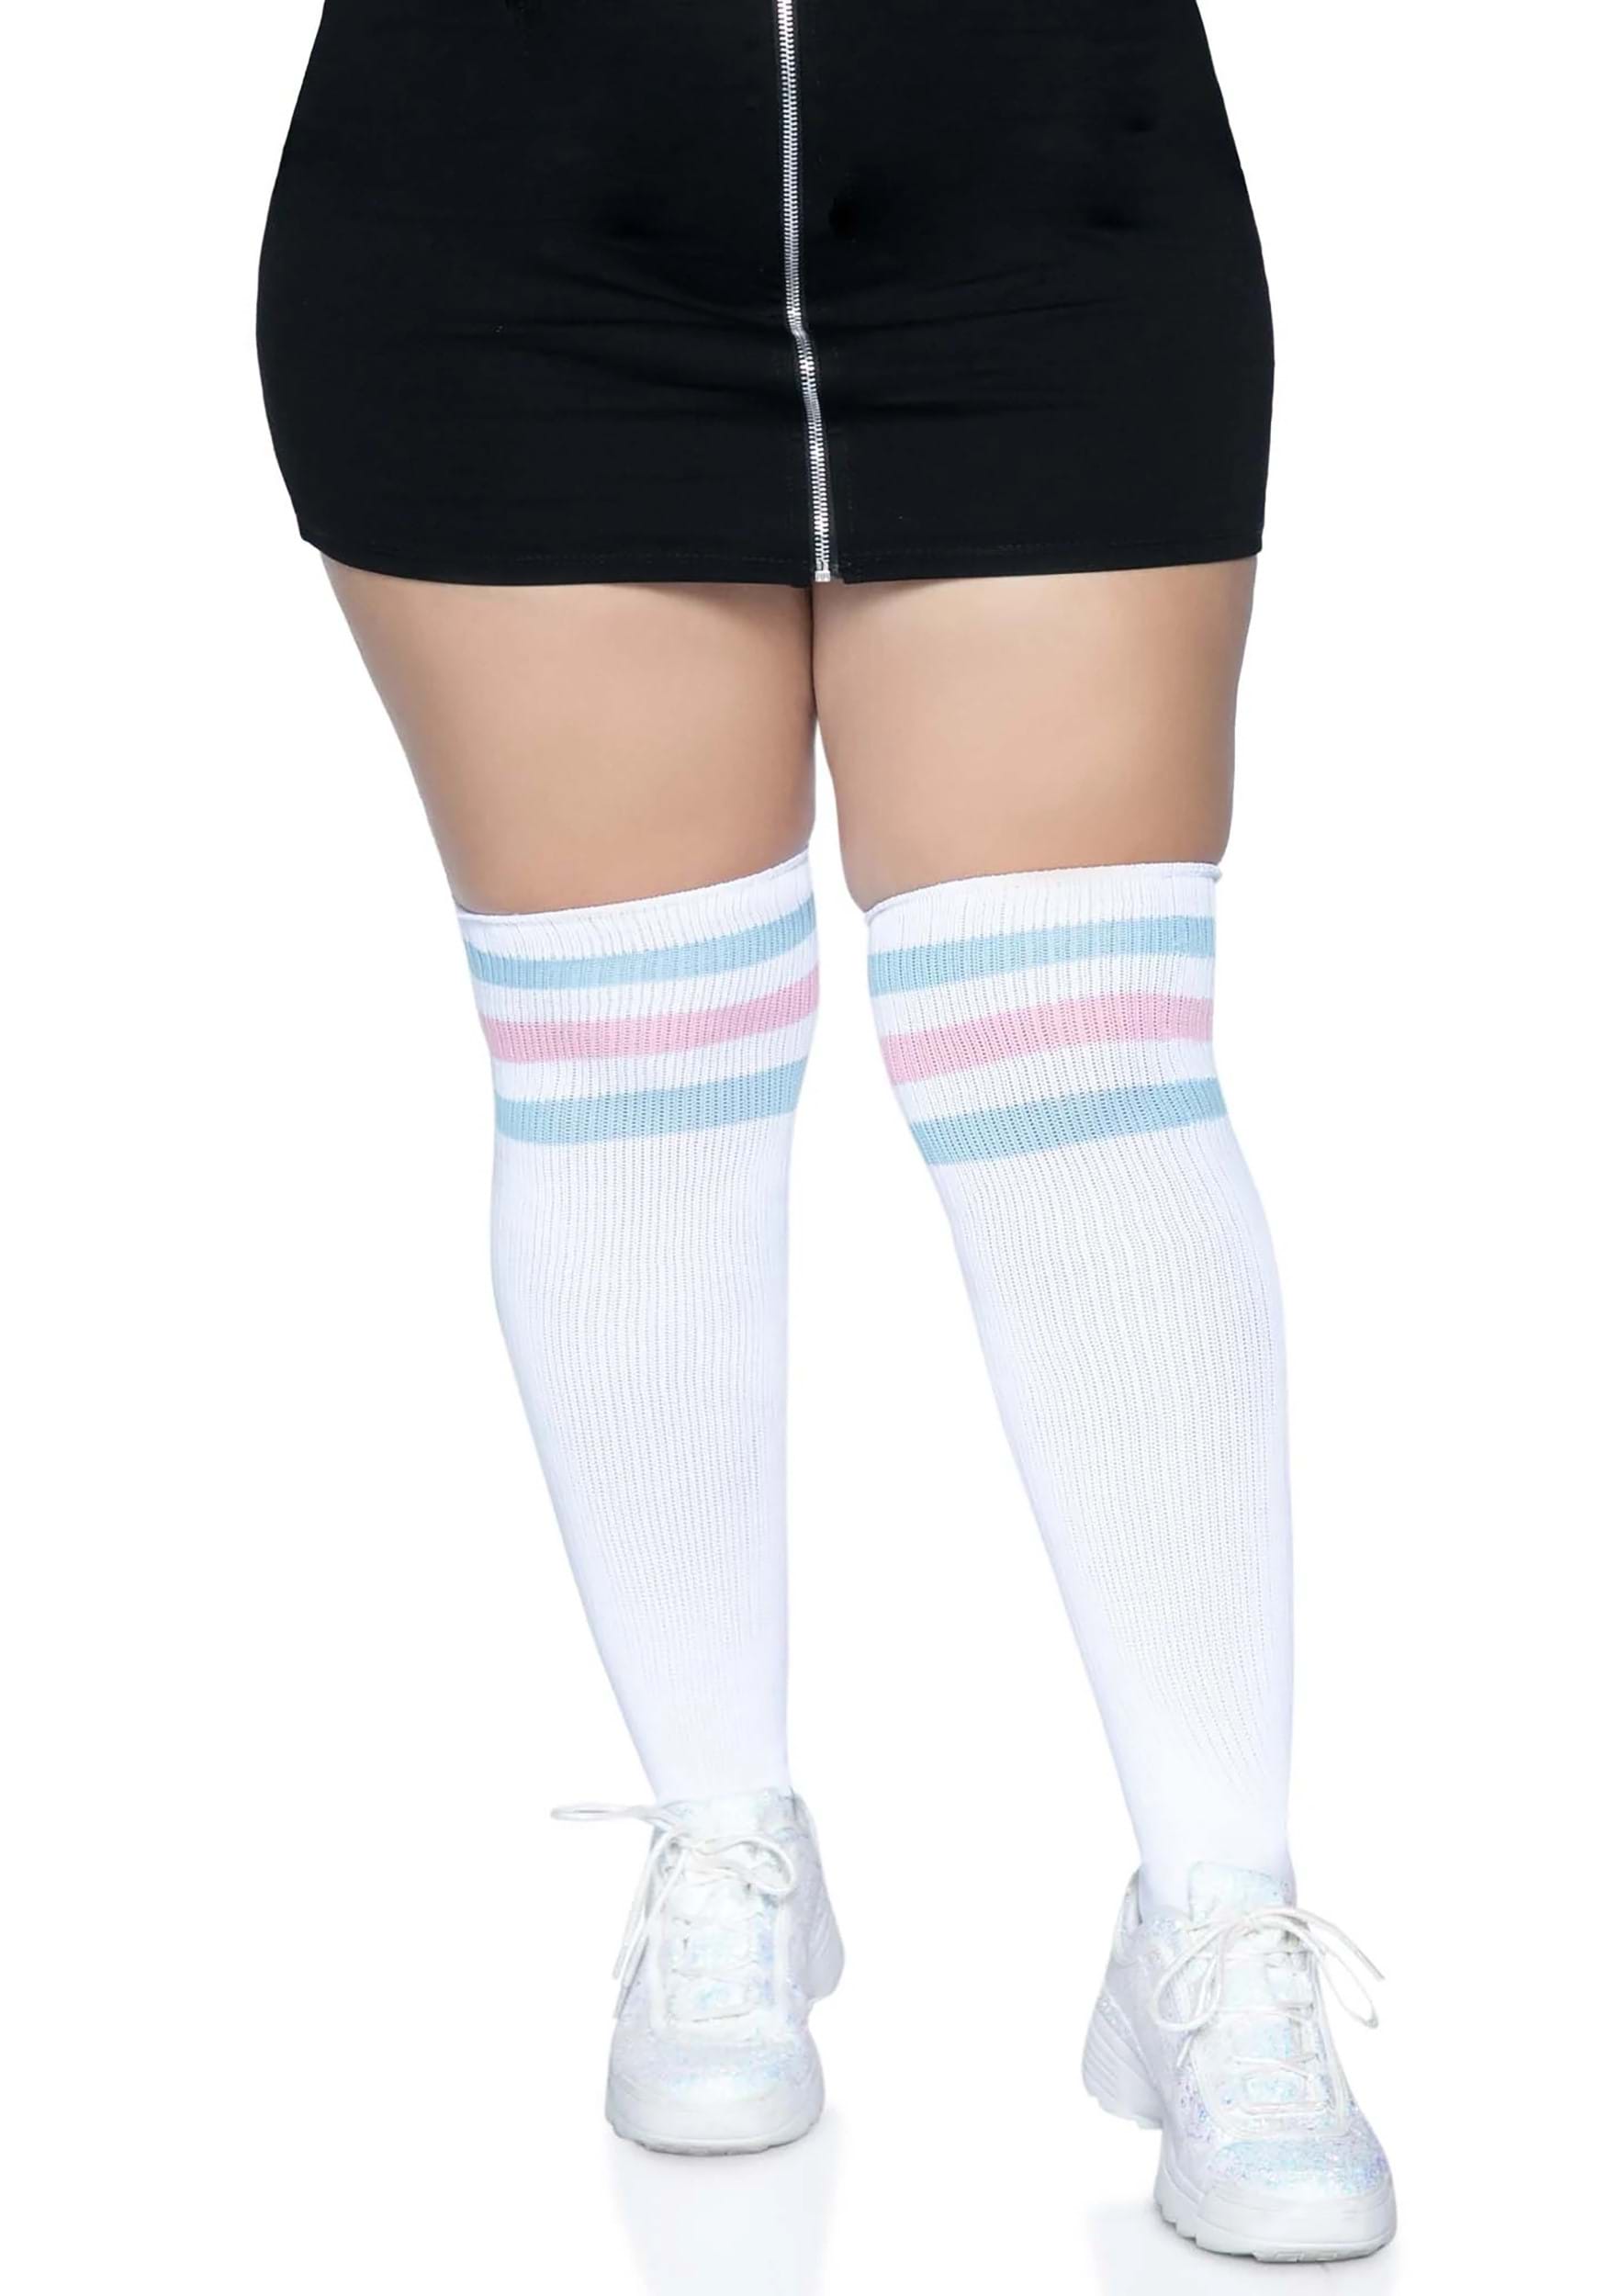 https://images.halloweencostumes.ca/products/82966/1-1/womens-plus-white-athletic-socks-with-pink-and-blue-stripes.jpg